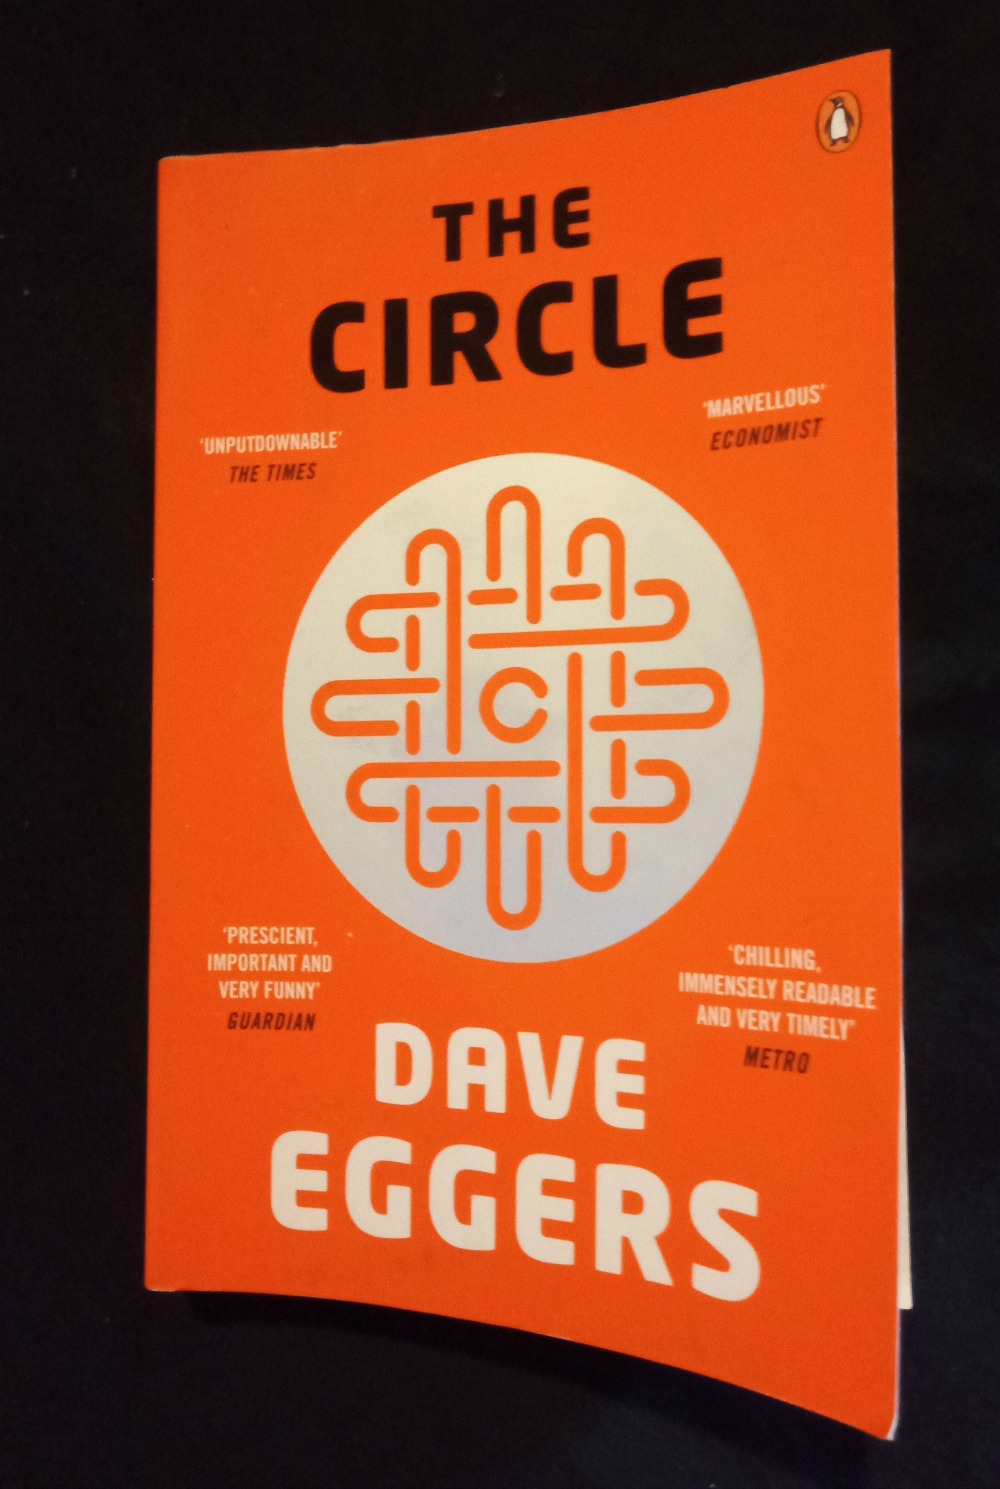 The Circle by Dave Eggers book cover